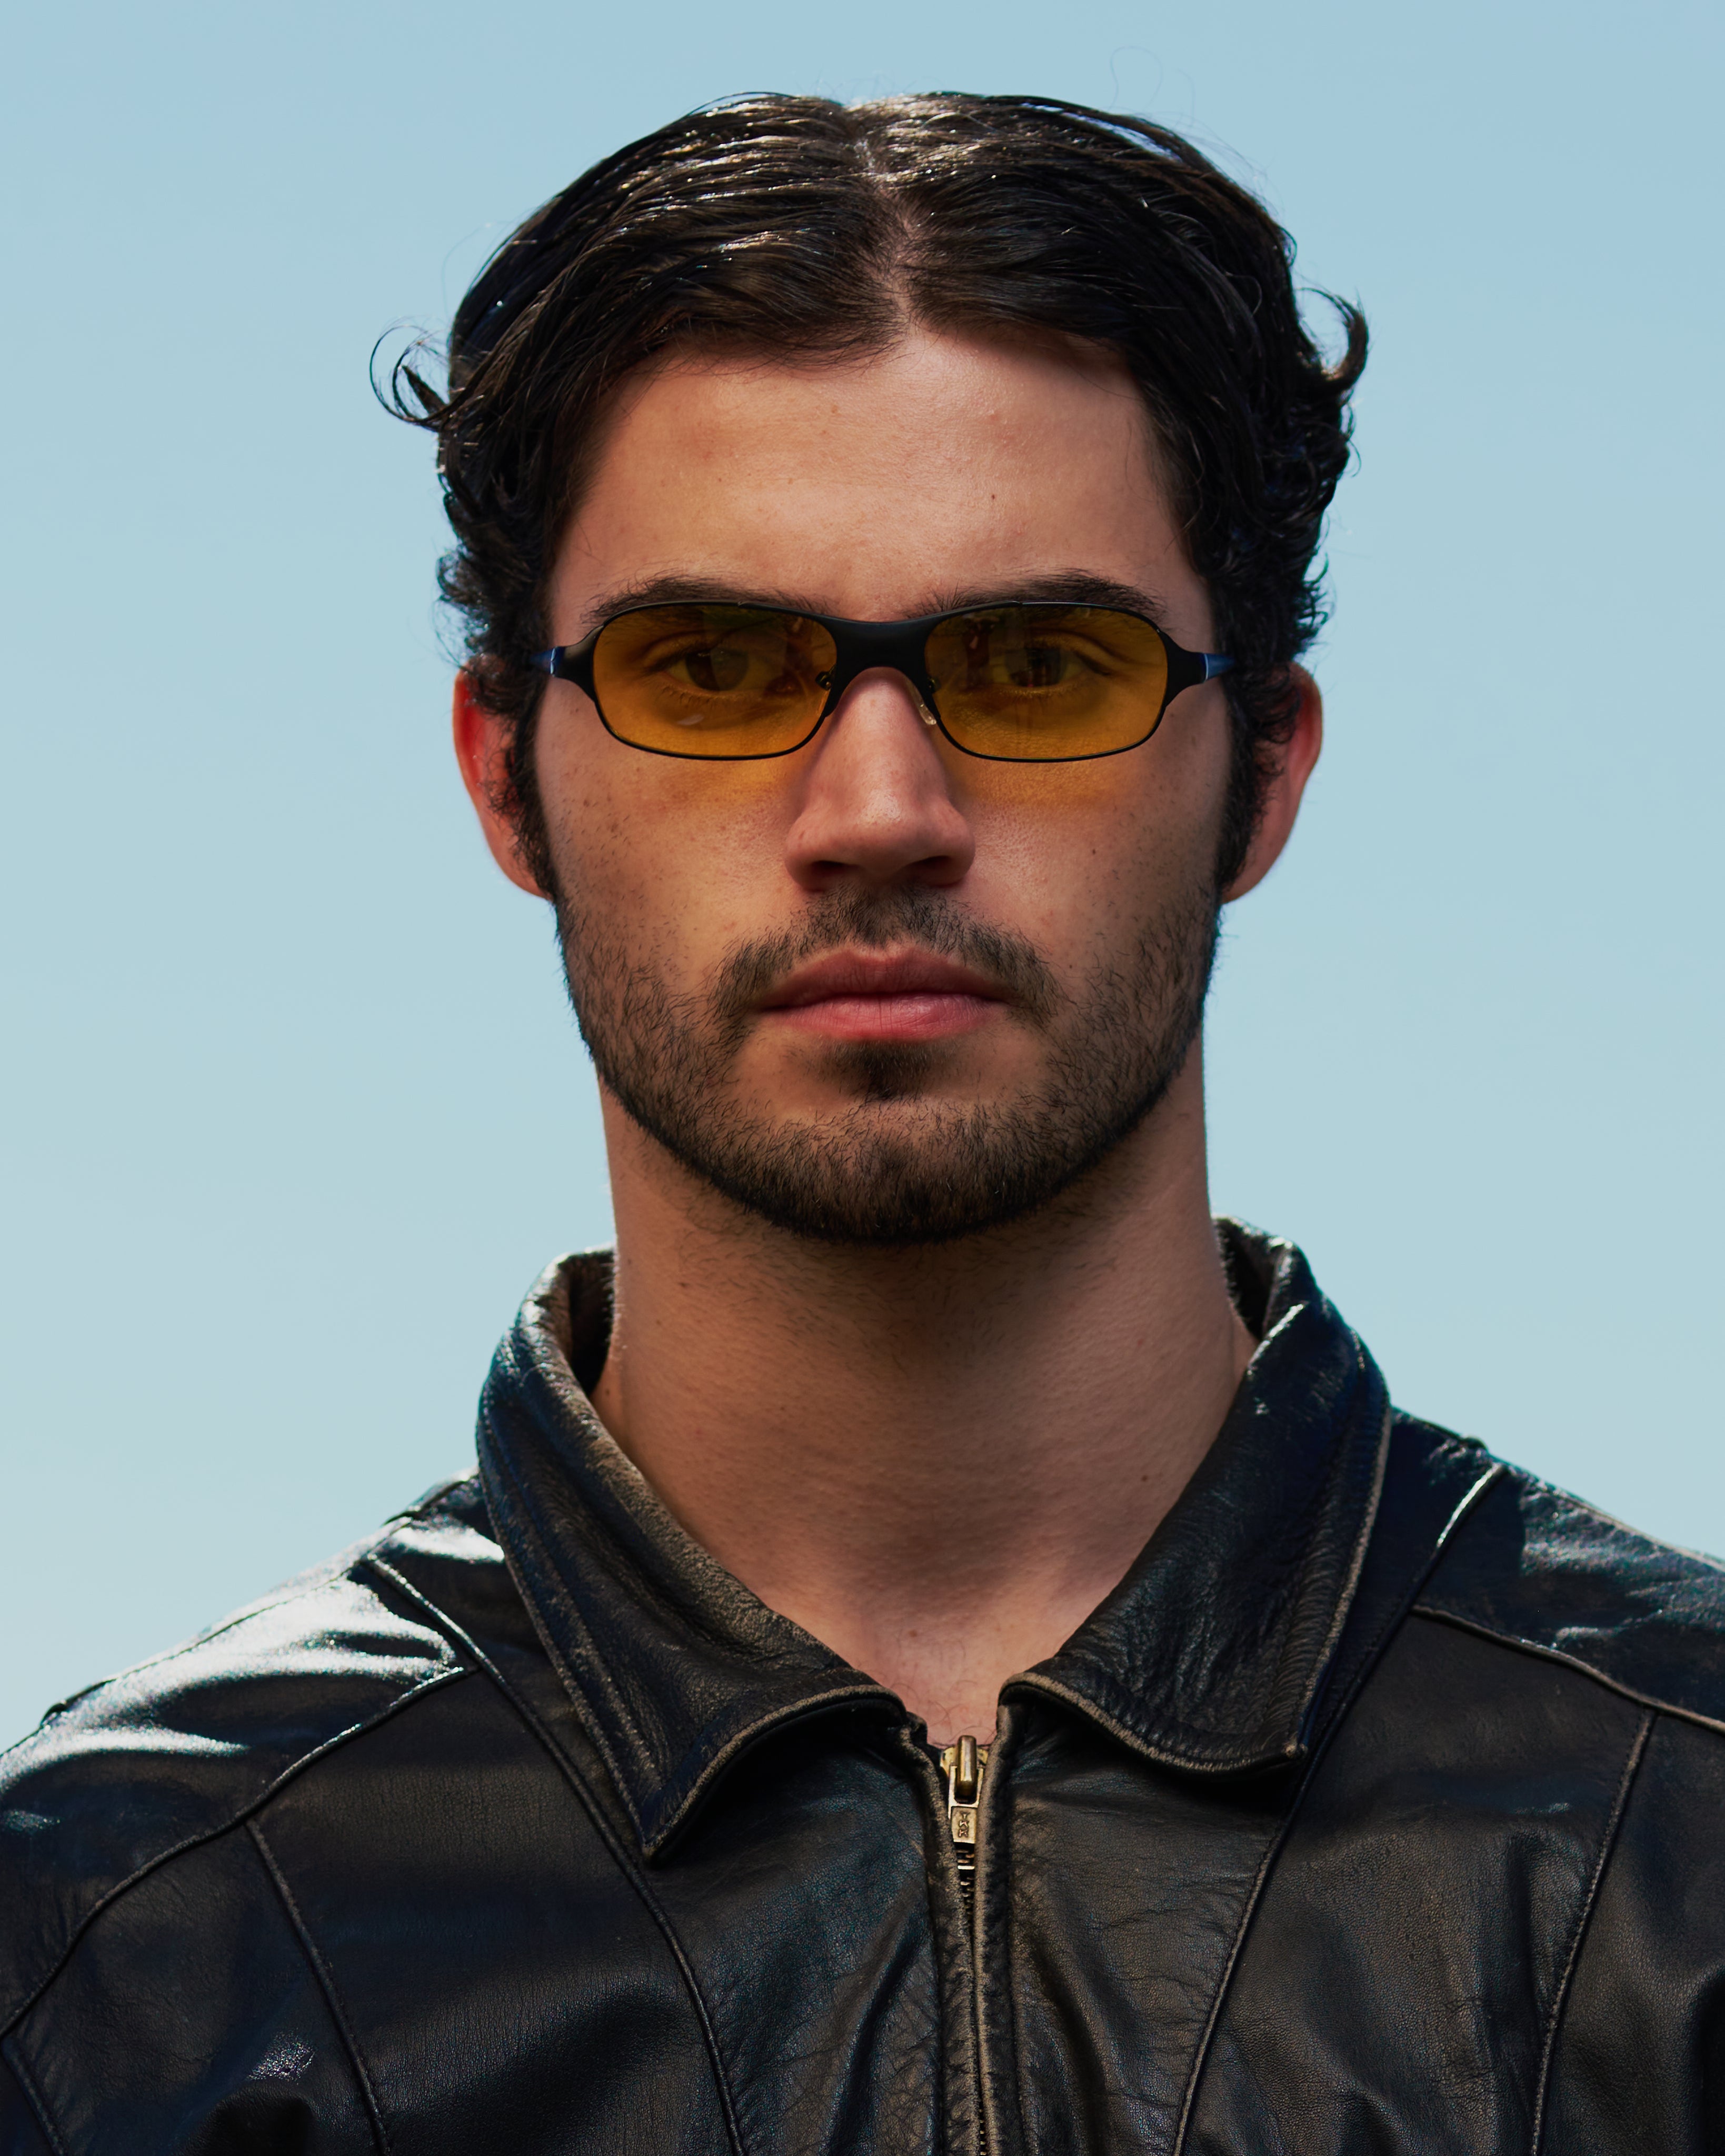 Man with dark hair in 90s / 2000s small frame glasses with yellow lenses and a black frame